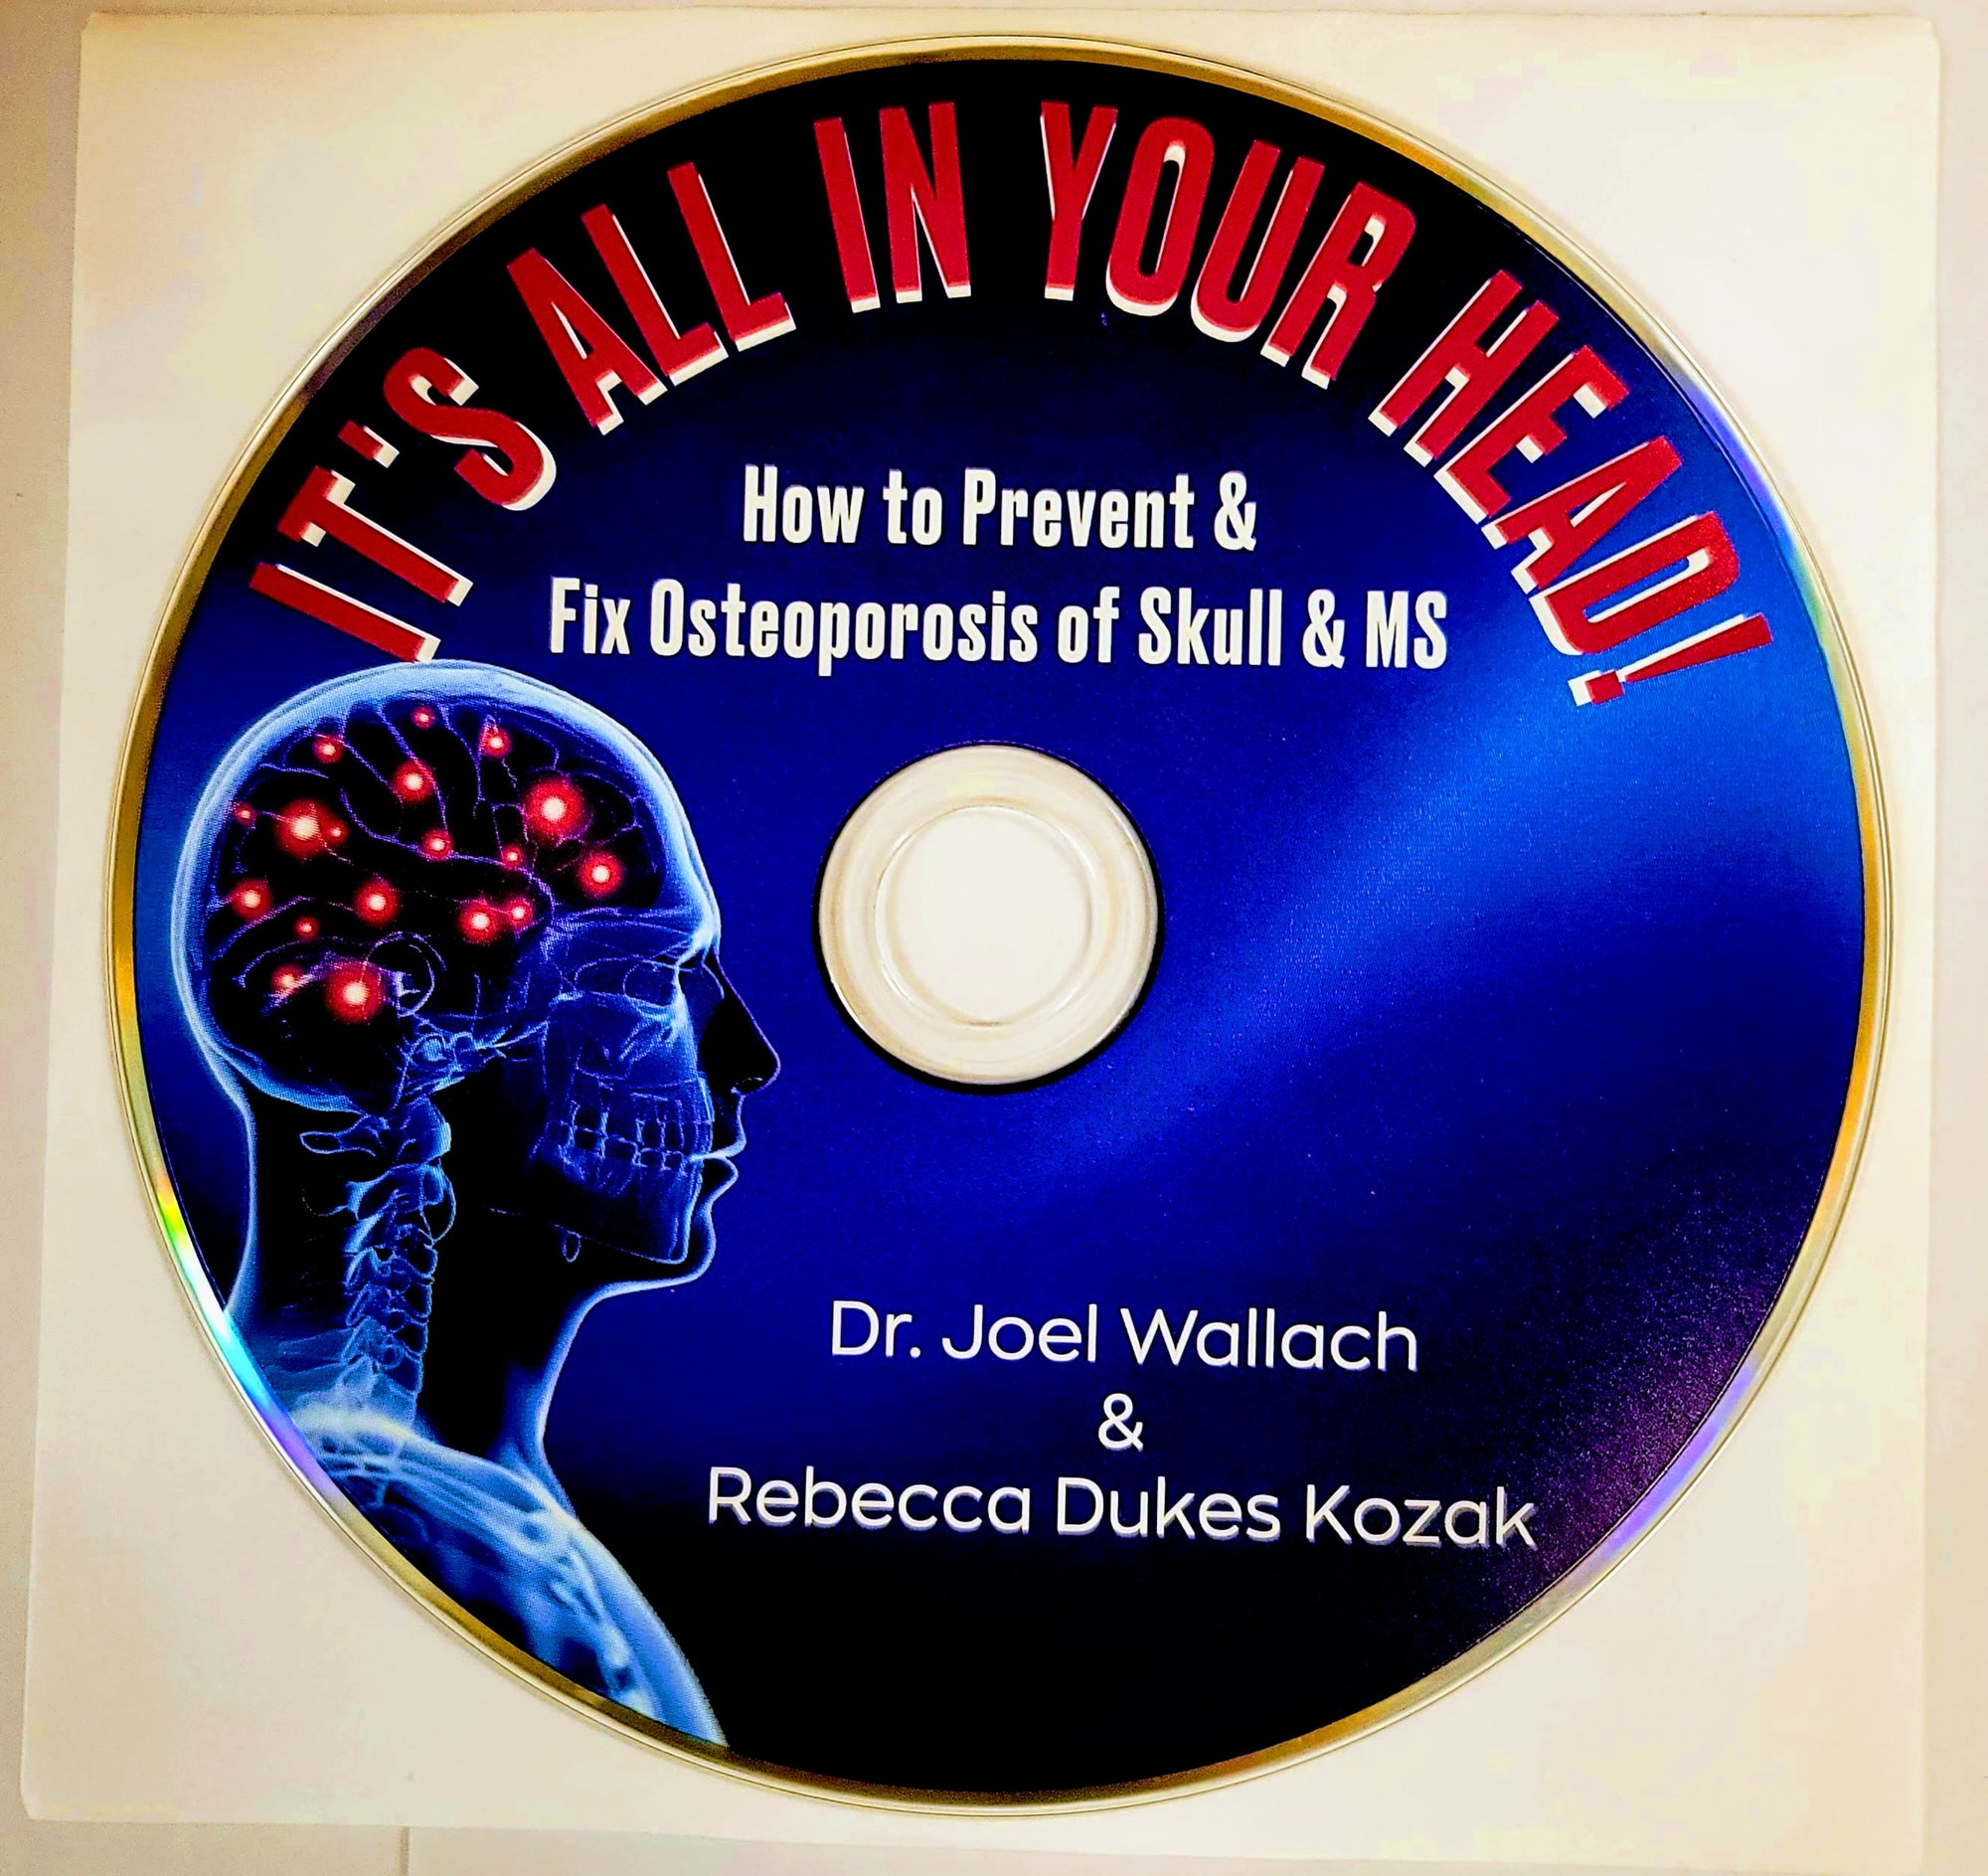 It's All In Your Head CD